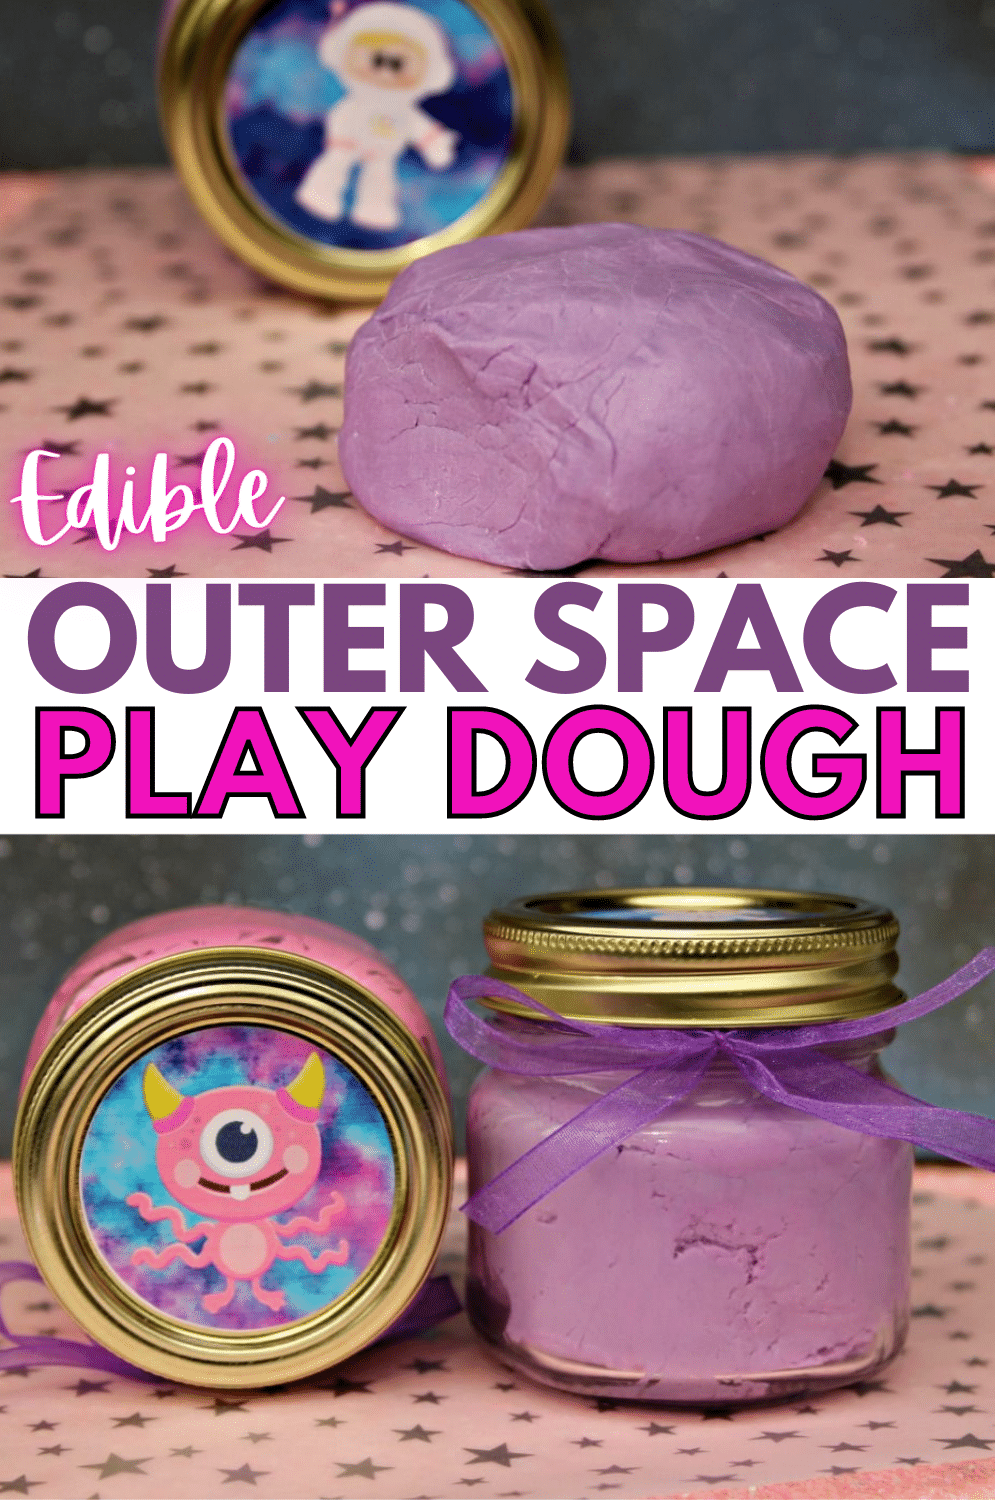 This Edible Outer Space Play Dough recipe is taste-safe and simple to make with only 2 or 3 ingredients. Young kids will love playing with this play dough. #playdough #edibleplaydough #activitesforkids via @wondermomwannab